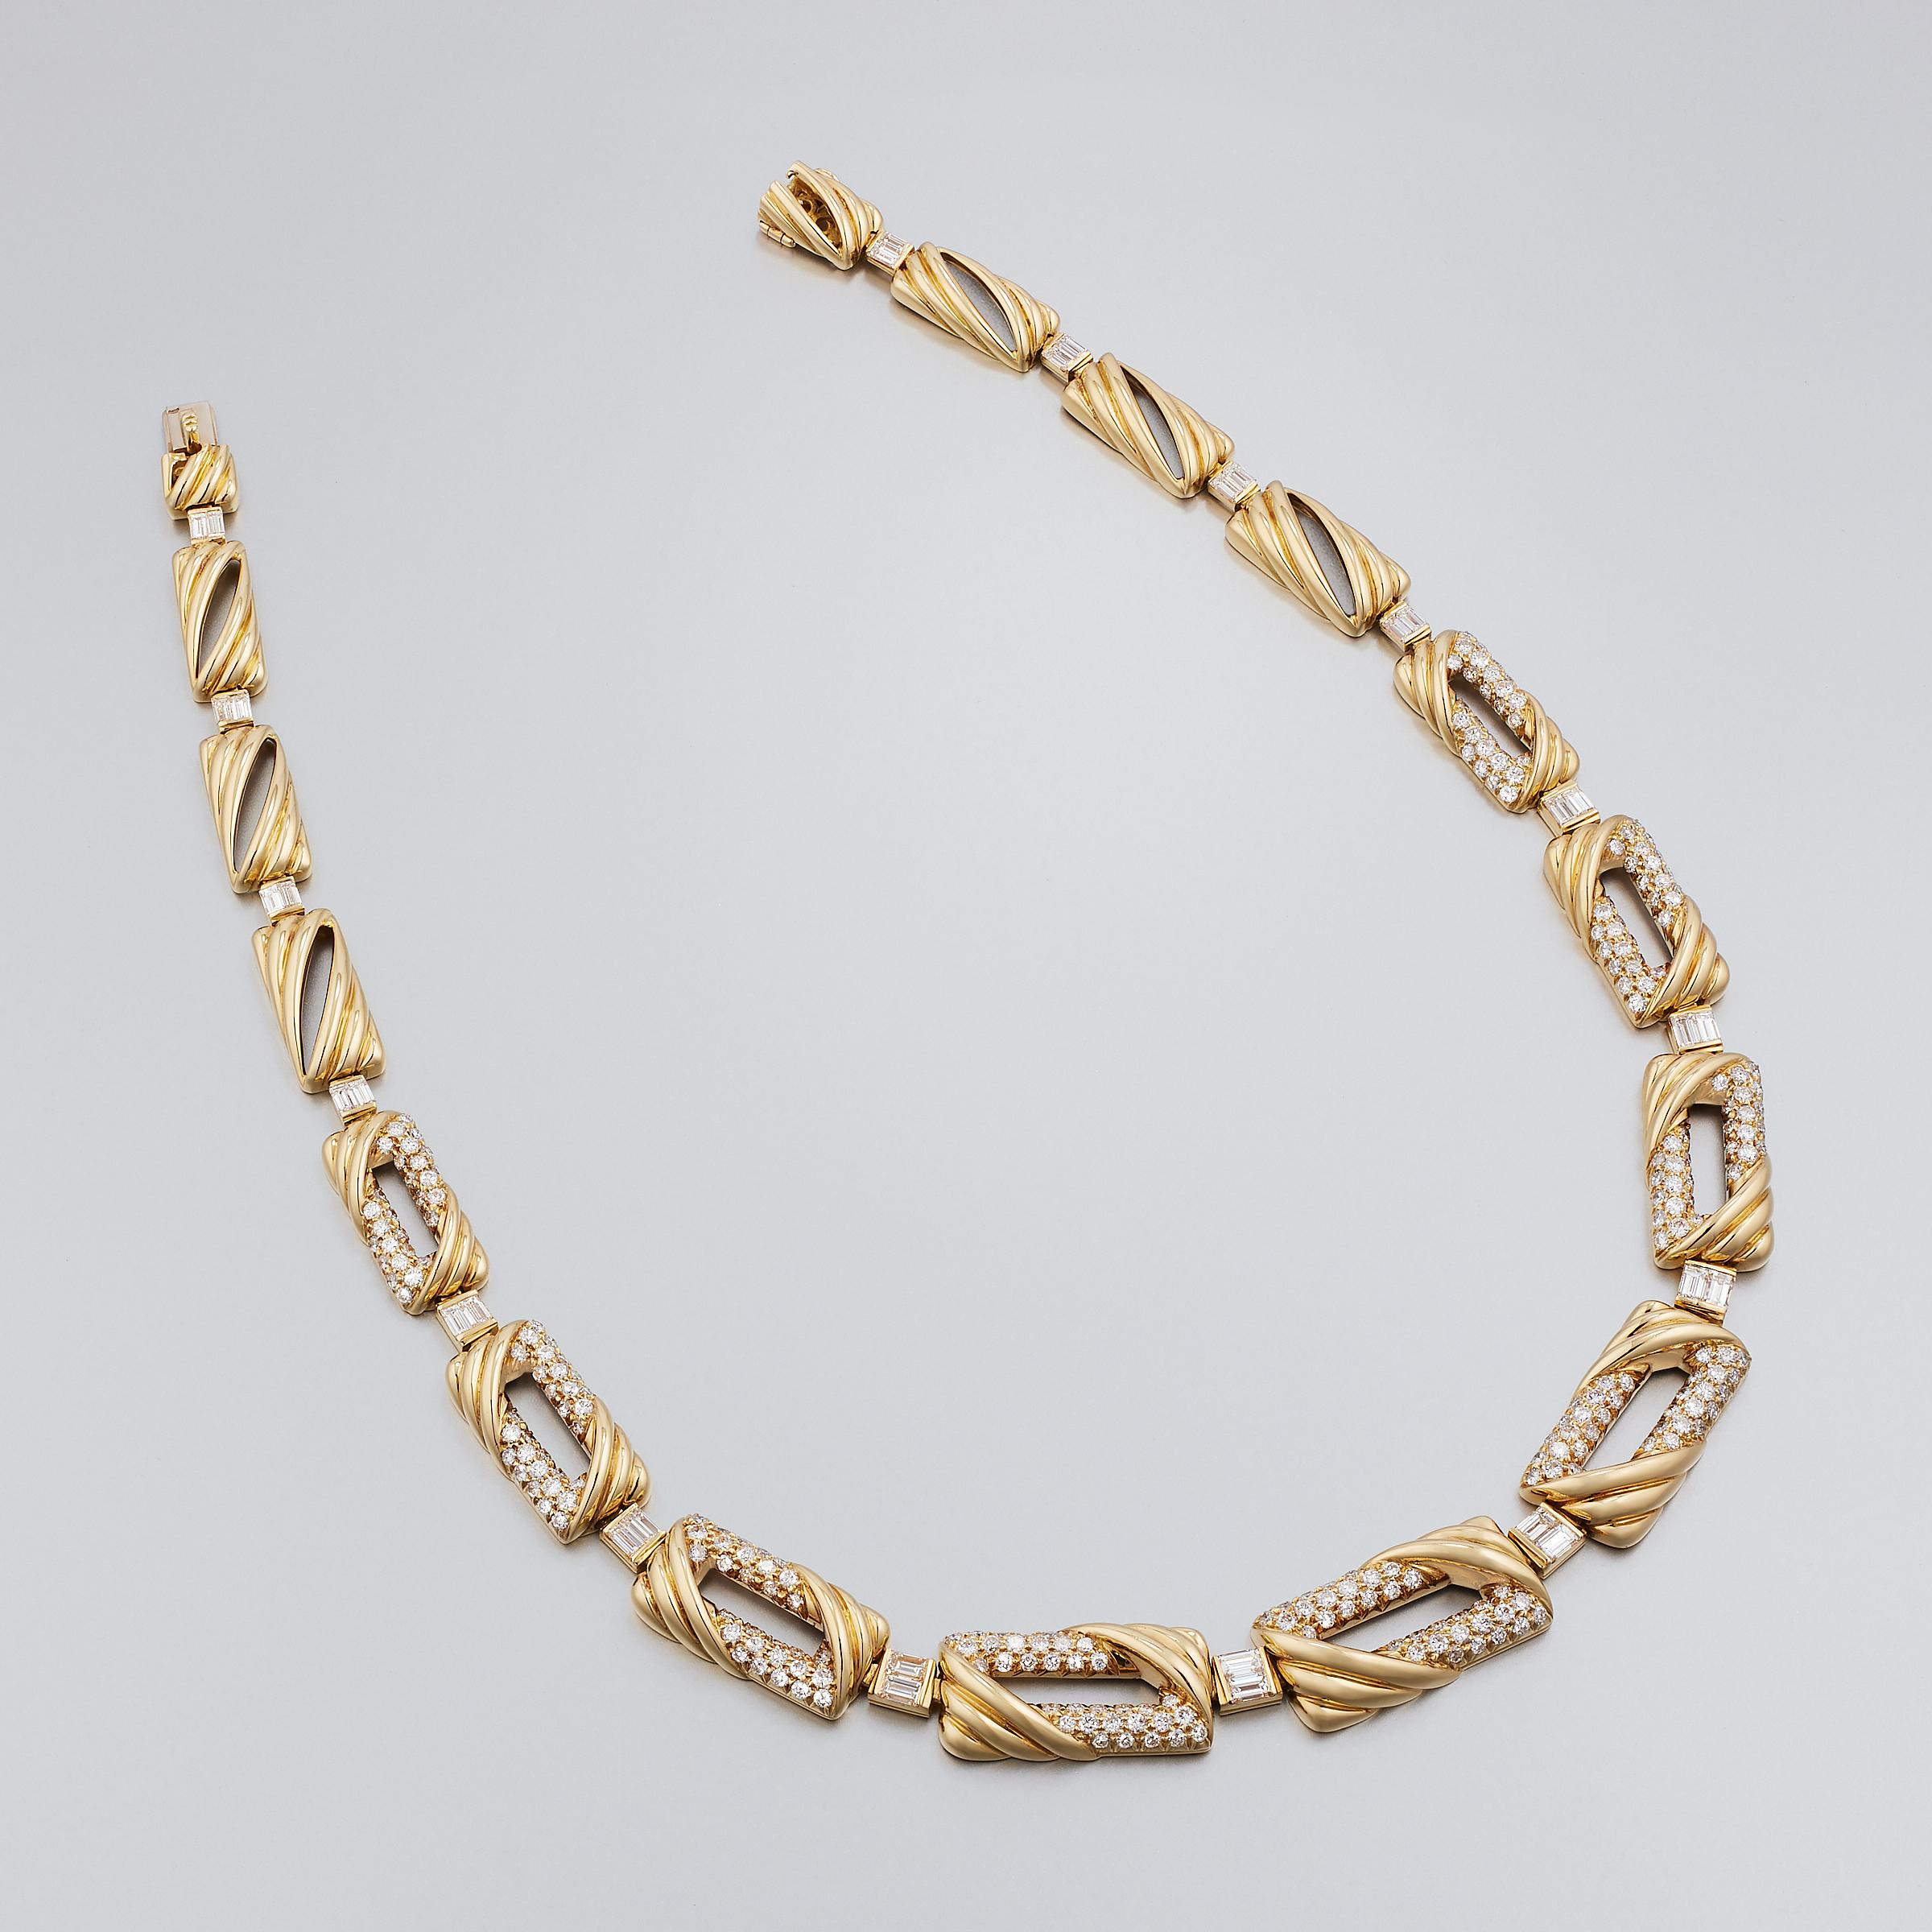 Mauboussin Paris Vintage 12cts Diamond Necklace in 18K Yellow Gold   In Excellent Condition For Sale In Dallas, TX